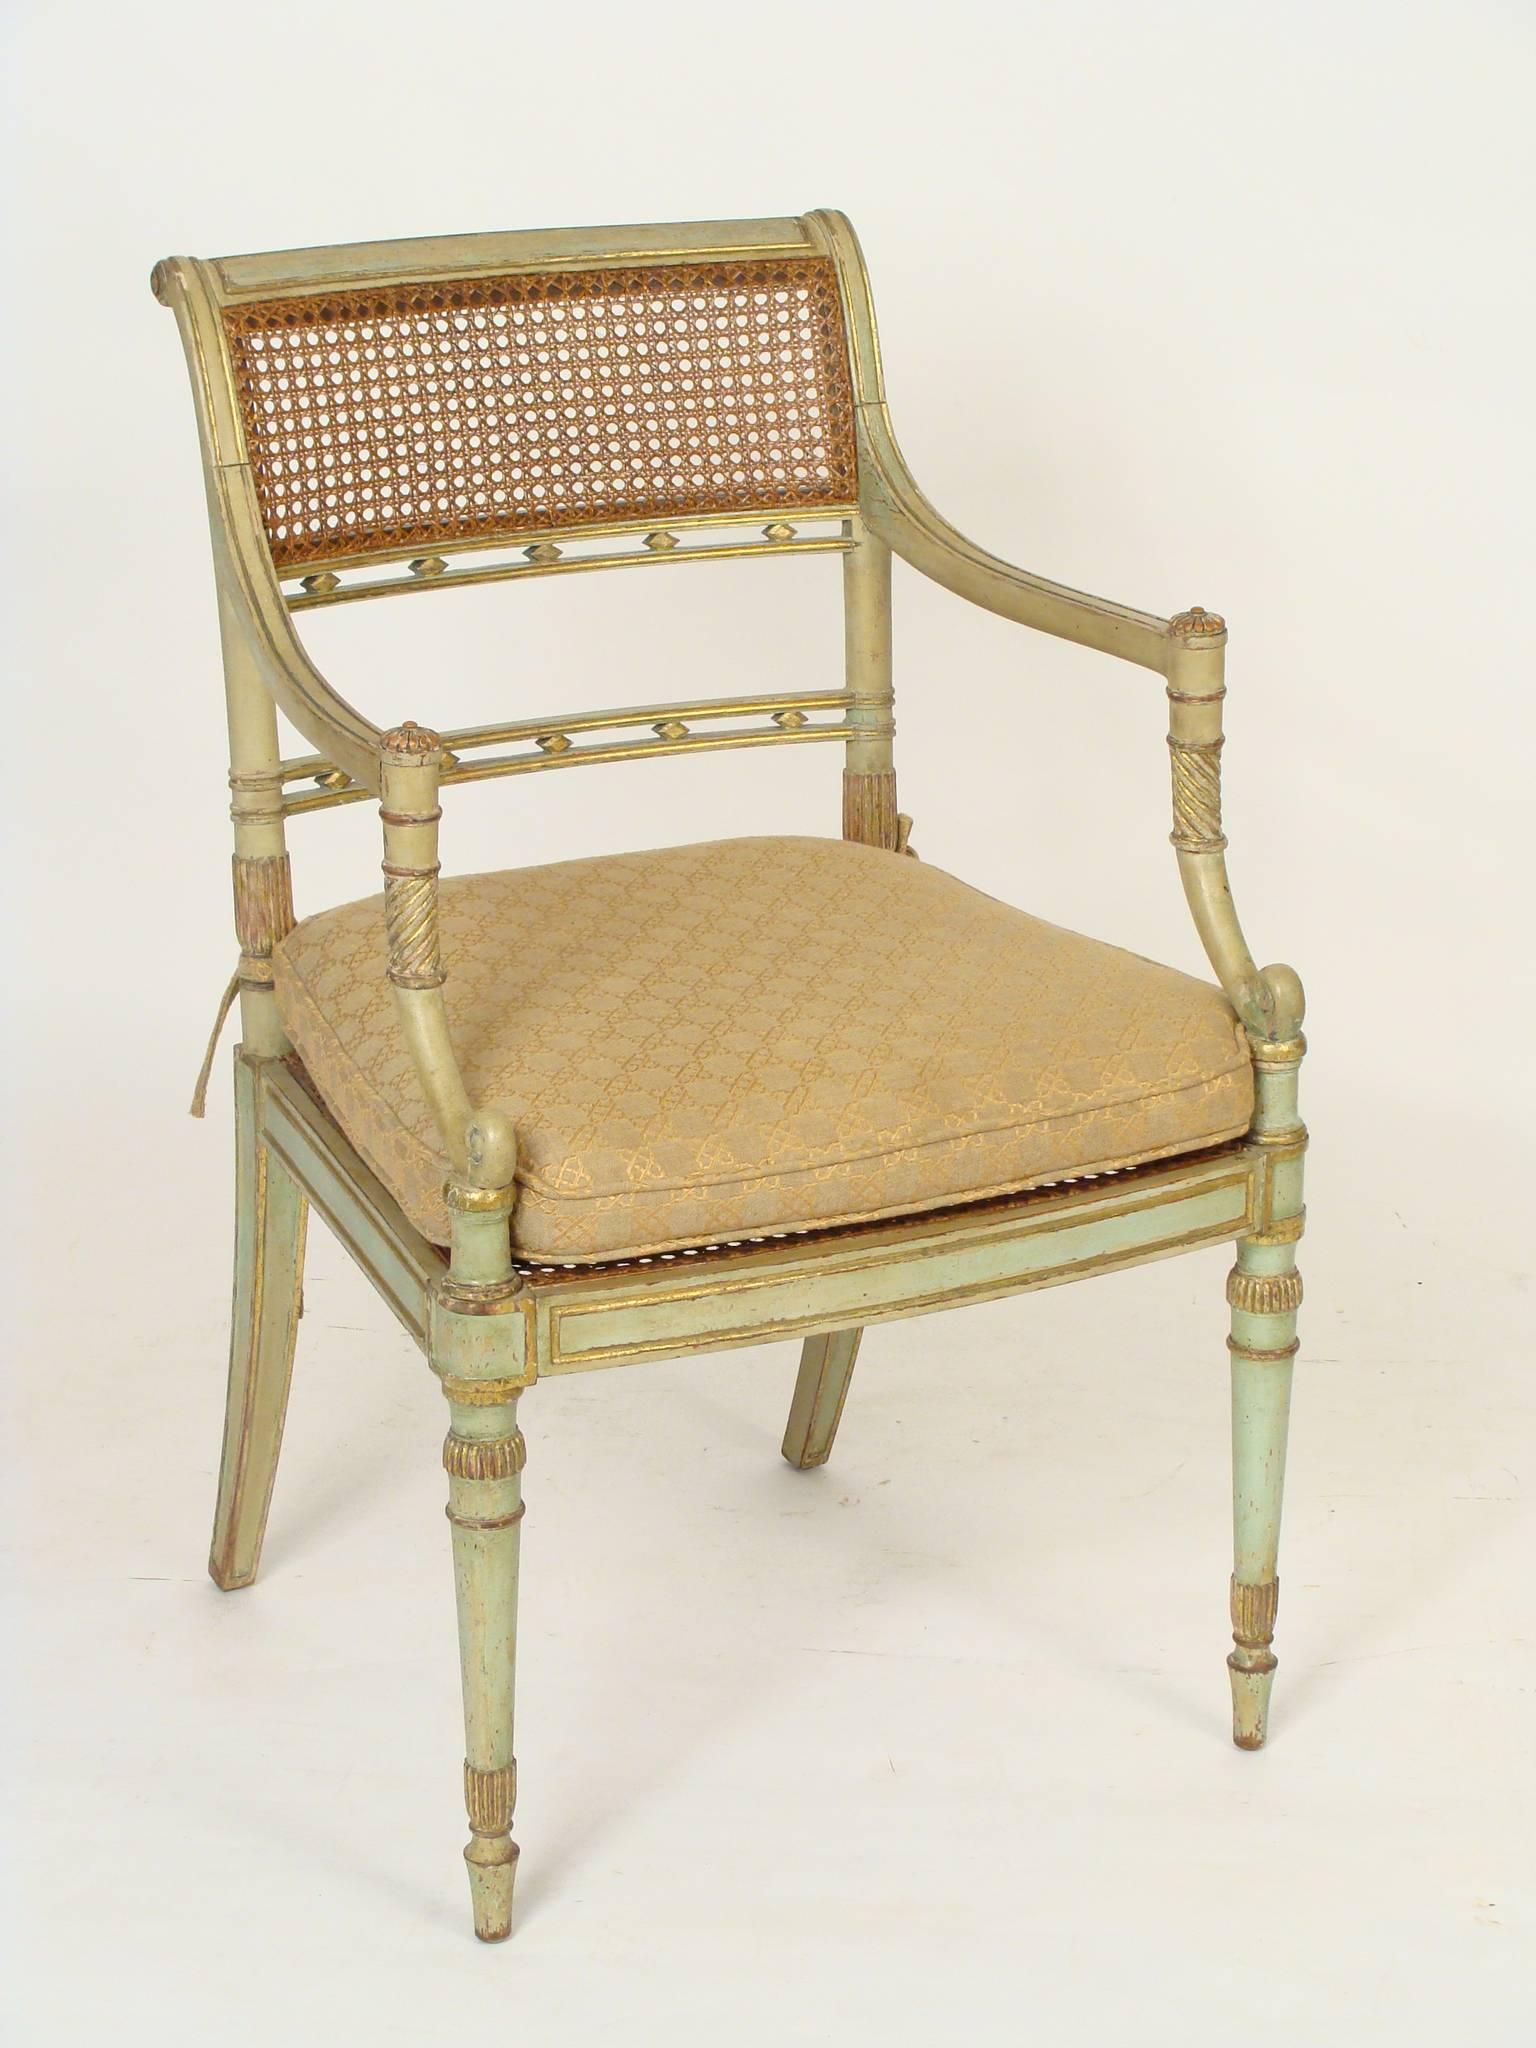 Pair of painted and partial-gilt English Regency style armchairs with caned backs and seats, circa 1990.